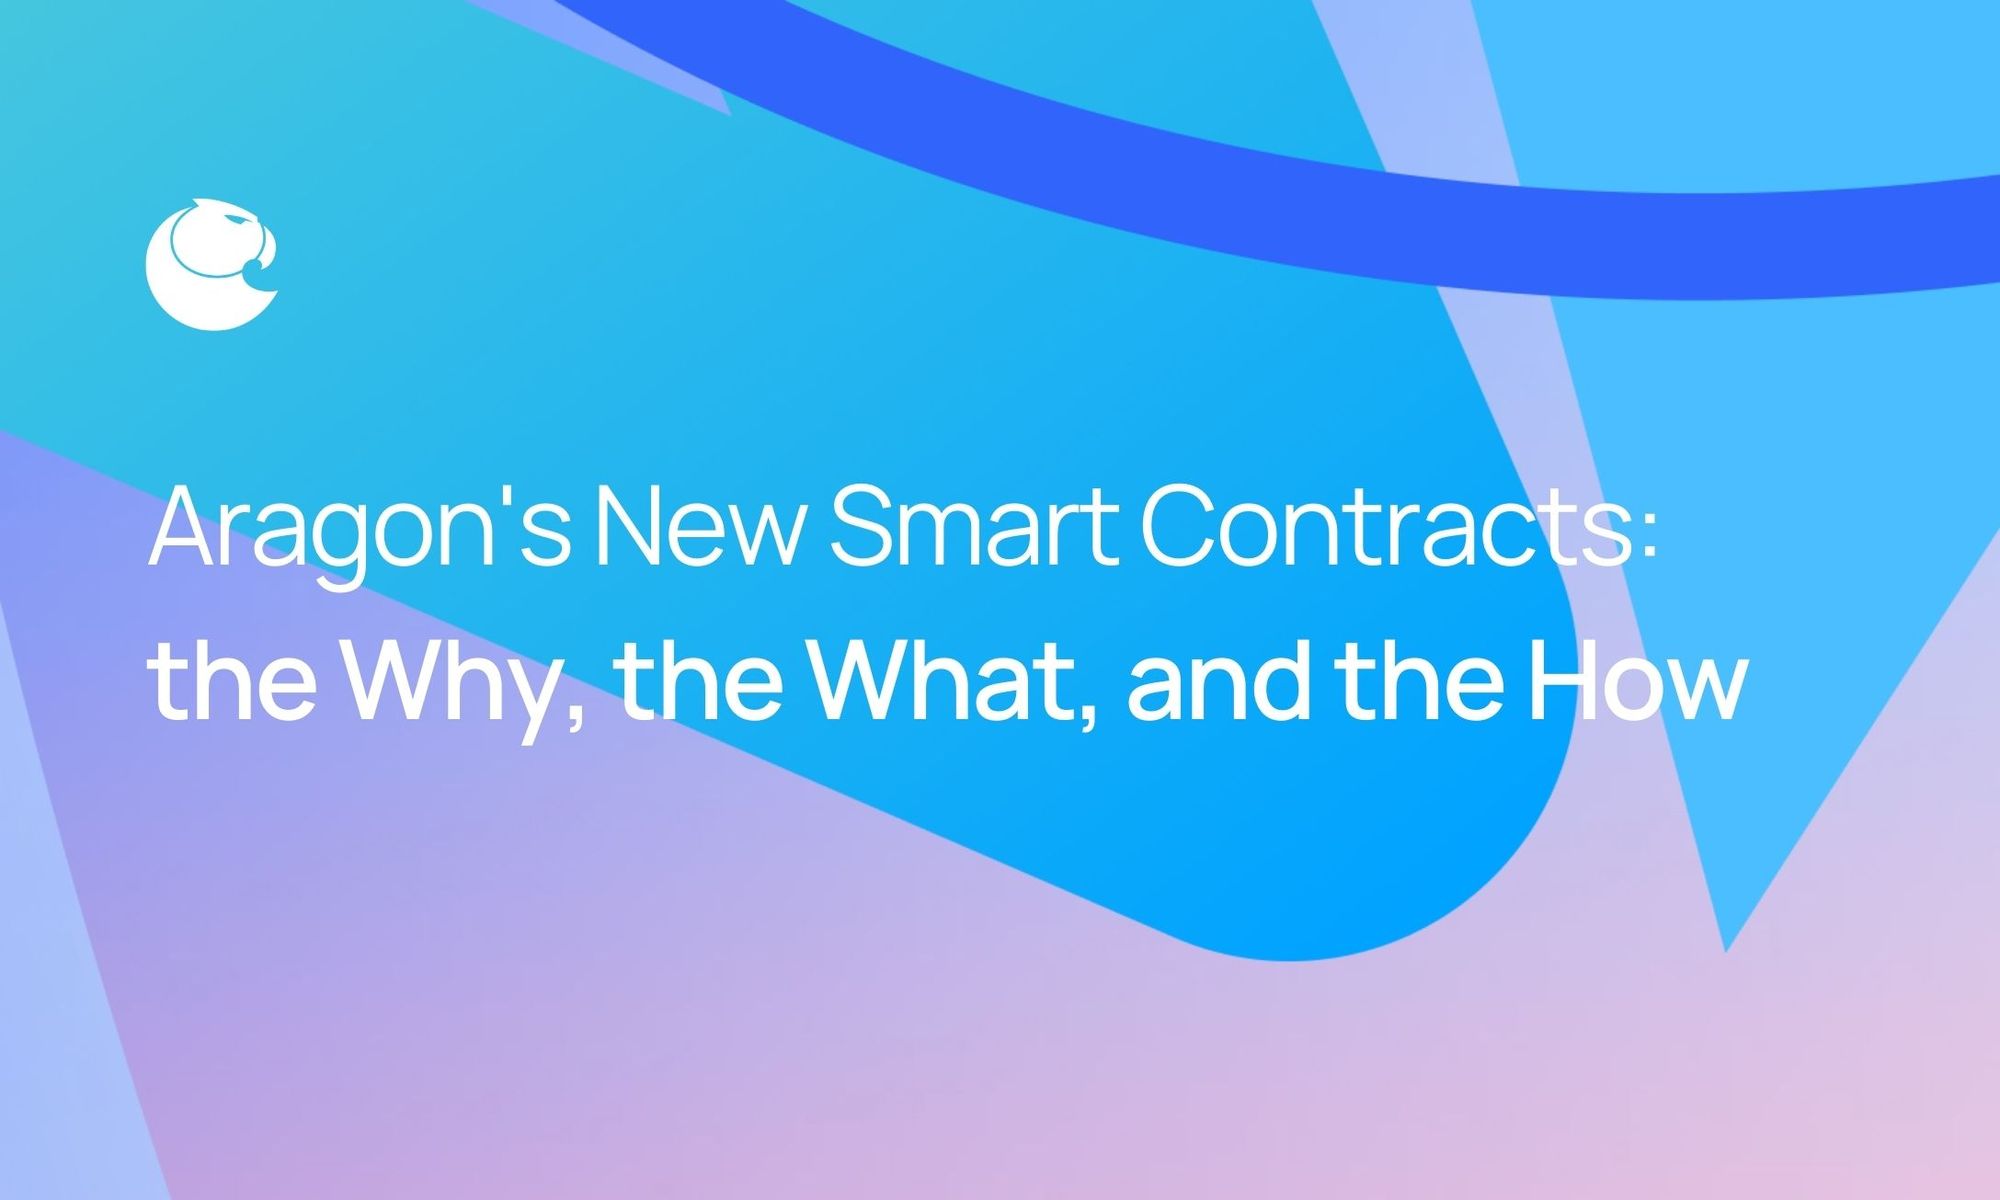 Aragon’s New Smart Contracts: the Why, the What, and the How